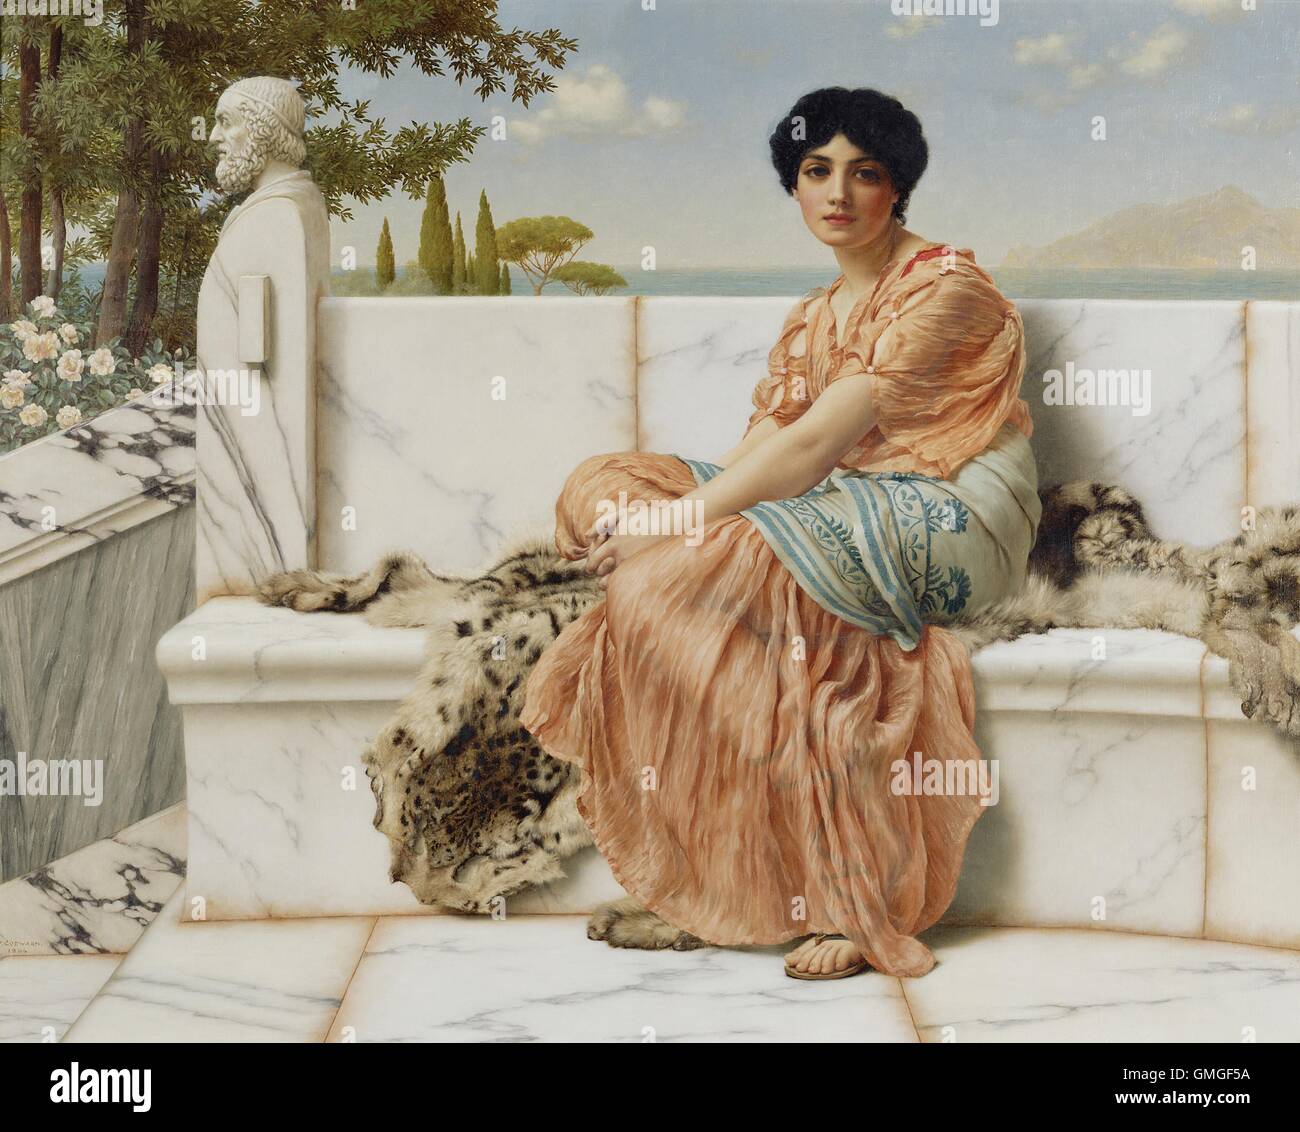 Reverie, by John William Godward, 1904, English painting, oil on canvas. A young woman sits on a smooth, veined marble bench terminating in a herm figure, probably representing the poet Homer. As a setting for beautiful young women, Godward painted variou (BSLOC 2016 6 66) Stock Photo